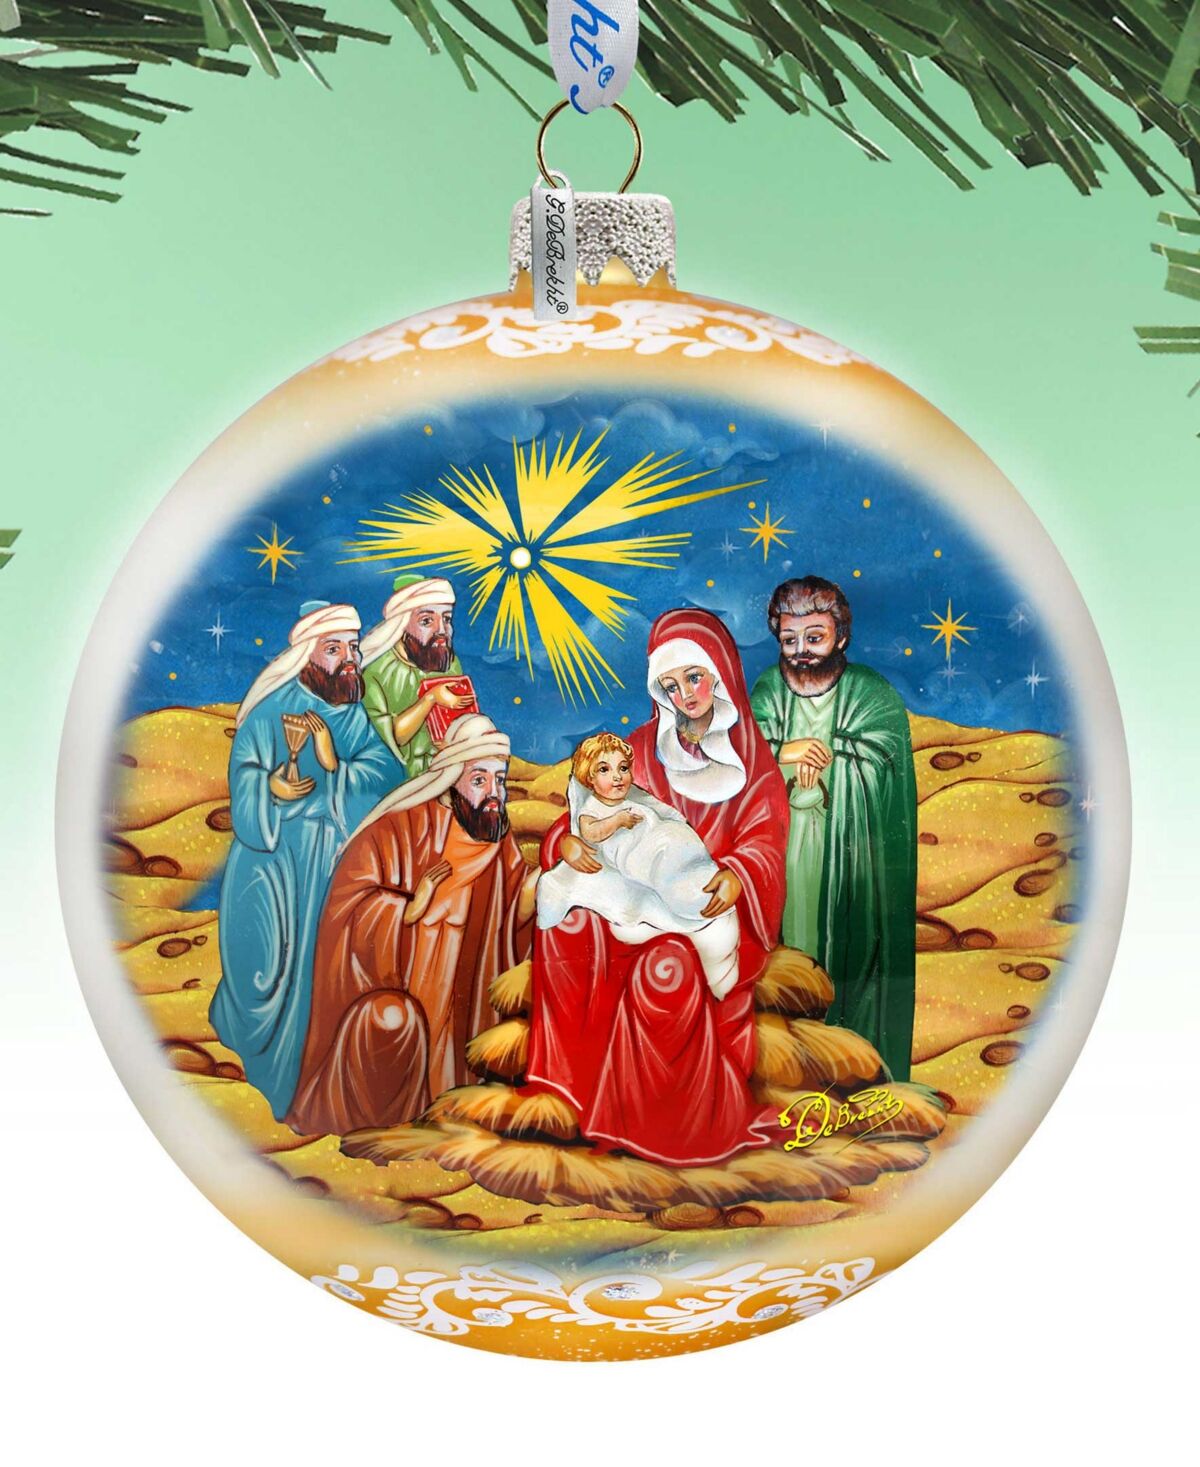 Designocracy Holy Family and Three Kings Lg Holiday Glass Collectible Ornaments G. DeBrekht - Multi Color